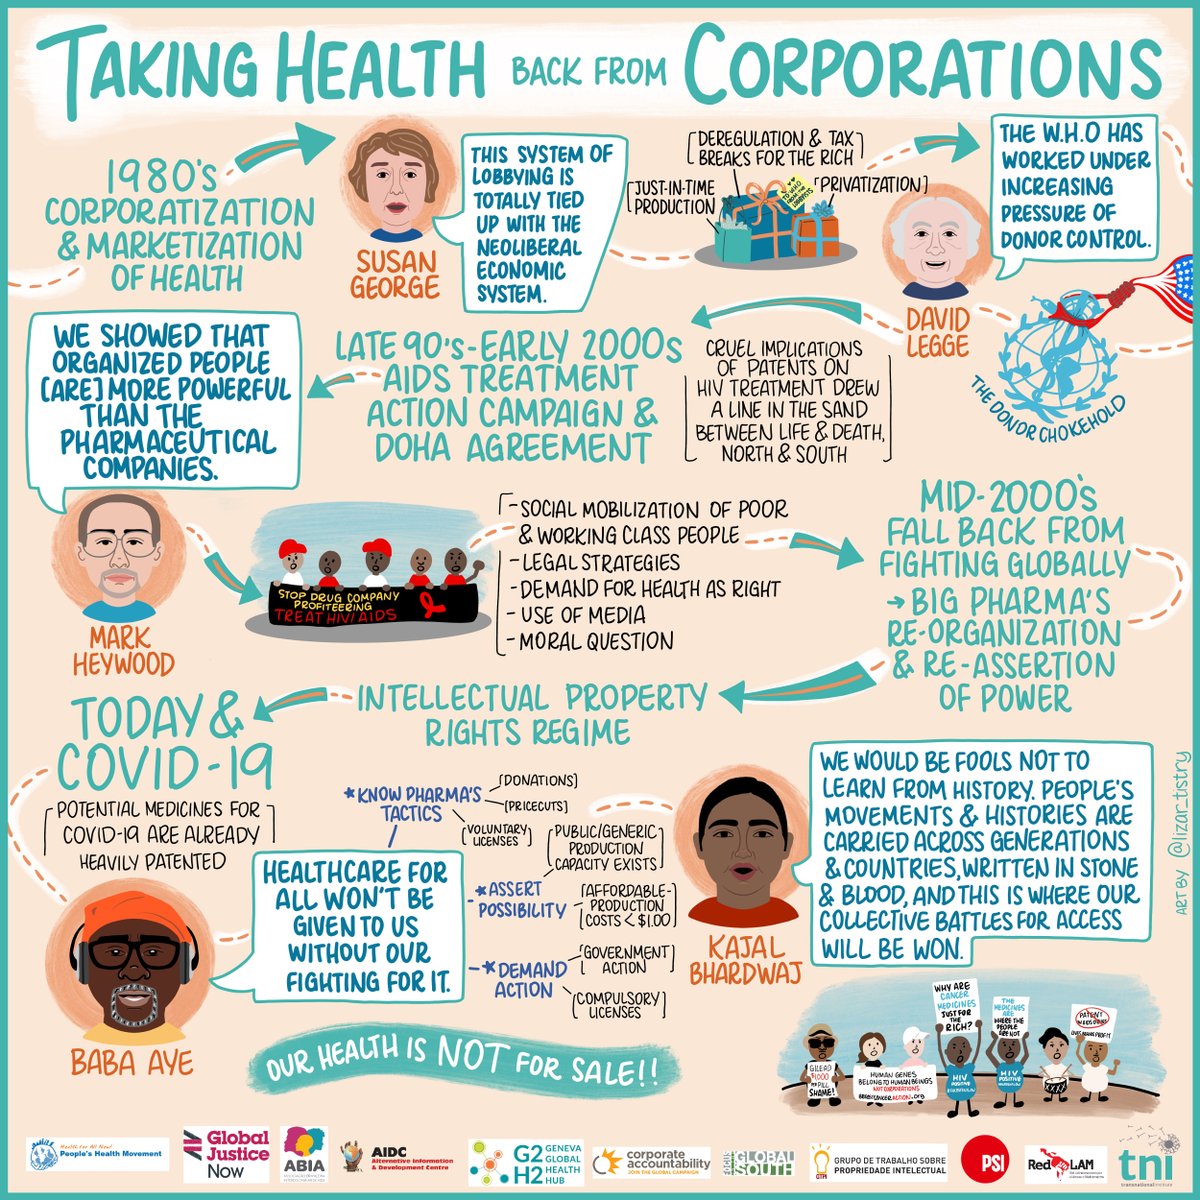 2. Healthcare – Privatised healthcare systems cannot cope with pandemics like COVID-19. Big pharma withholding access to medicines have impacted upon those most in need. We must prioritise resourcing universal public health services across the globe.